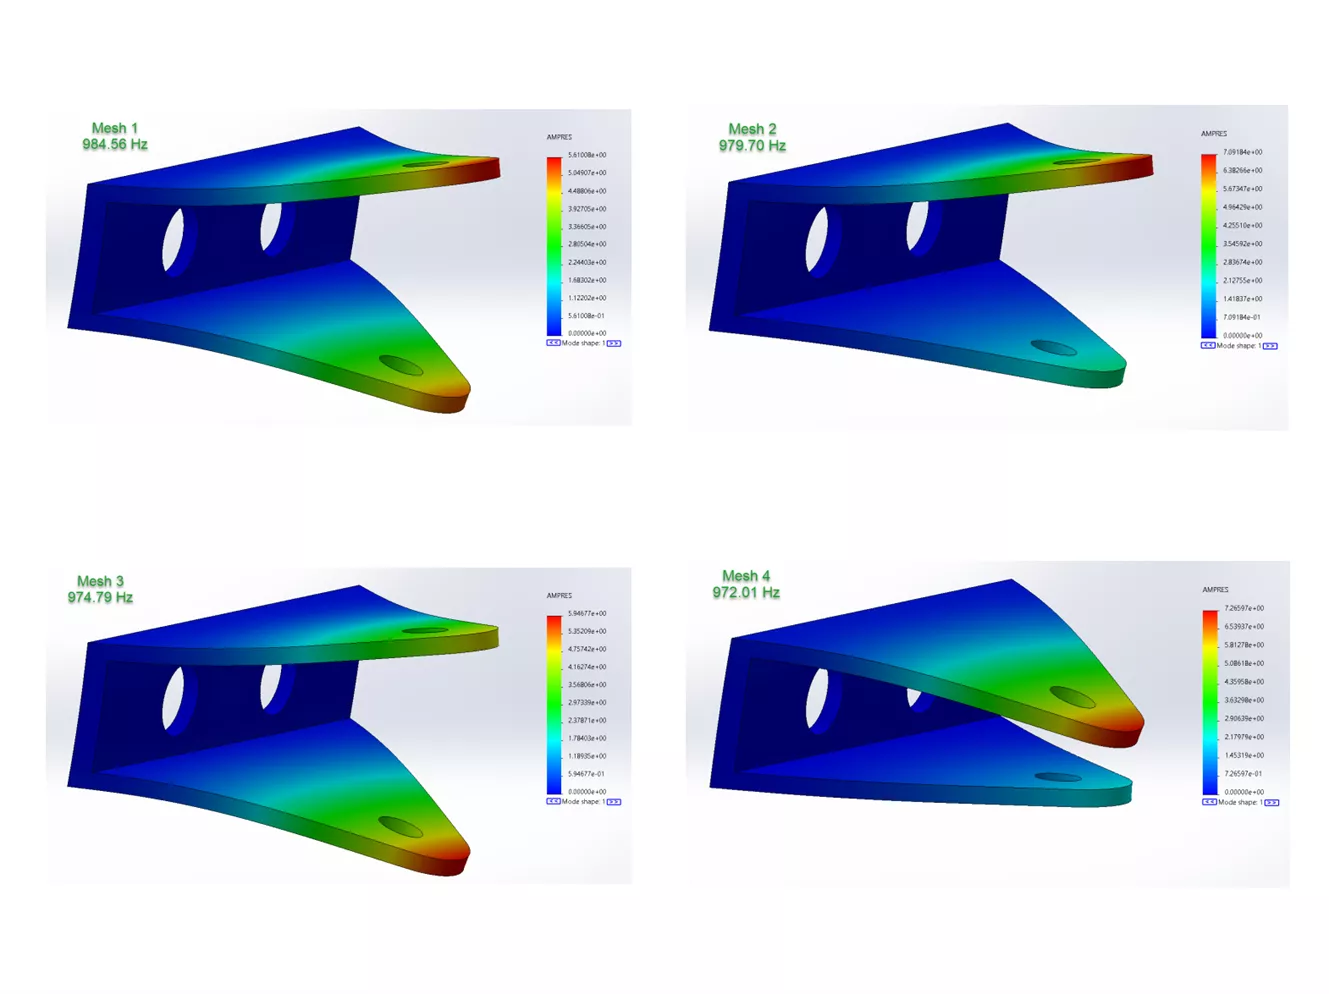 Mode Shape for Natural Frequency of four Different Mesh Density Studies